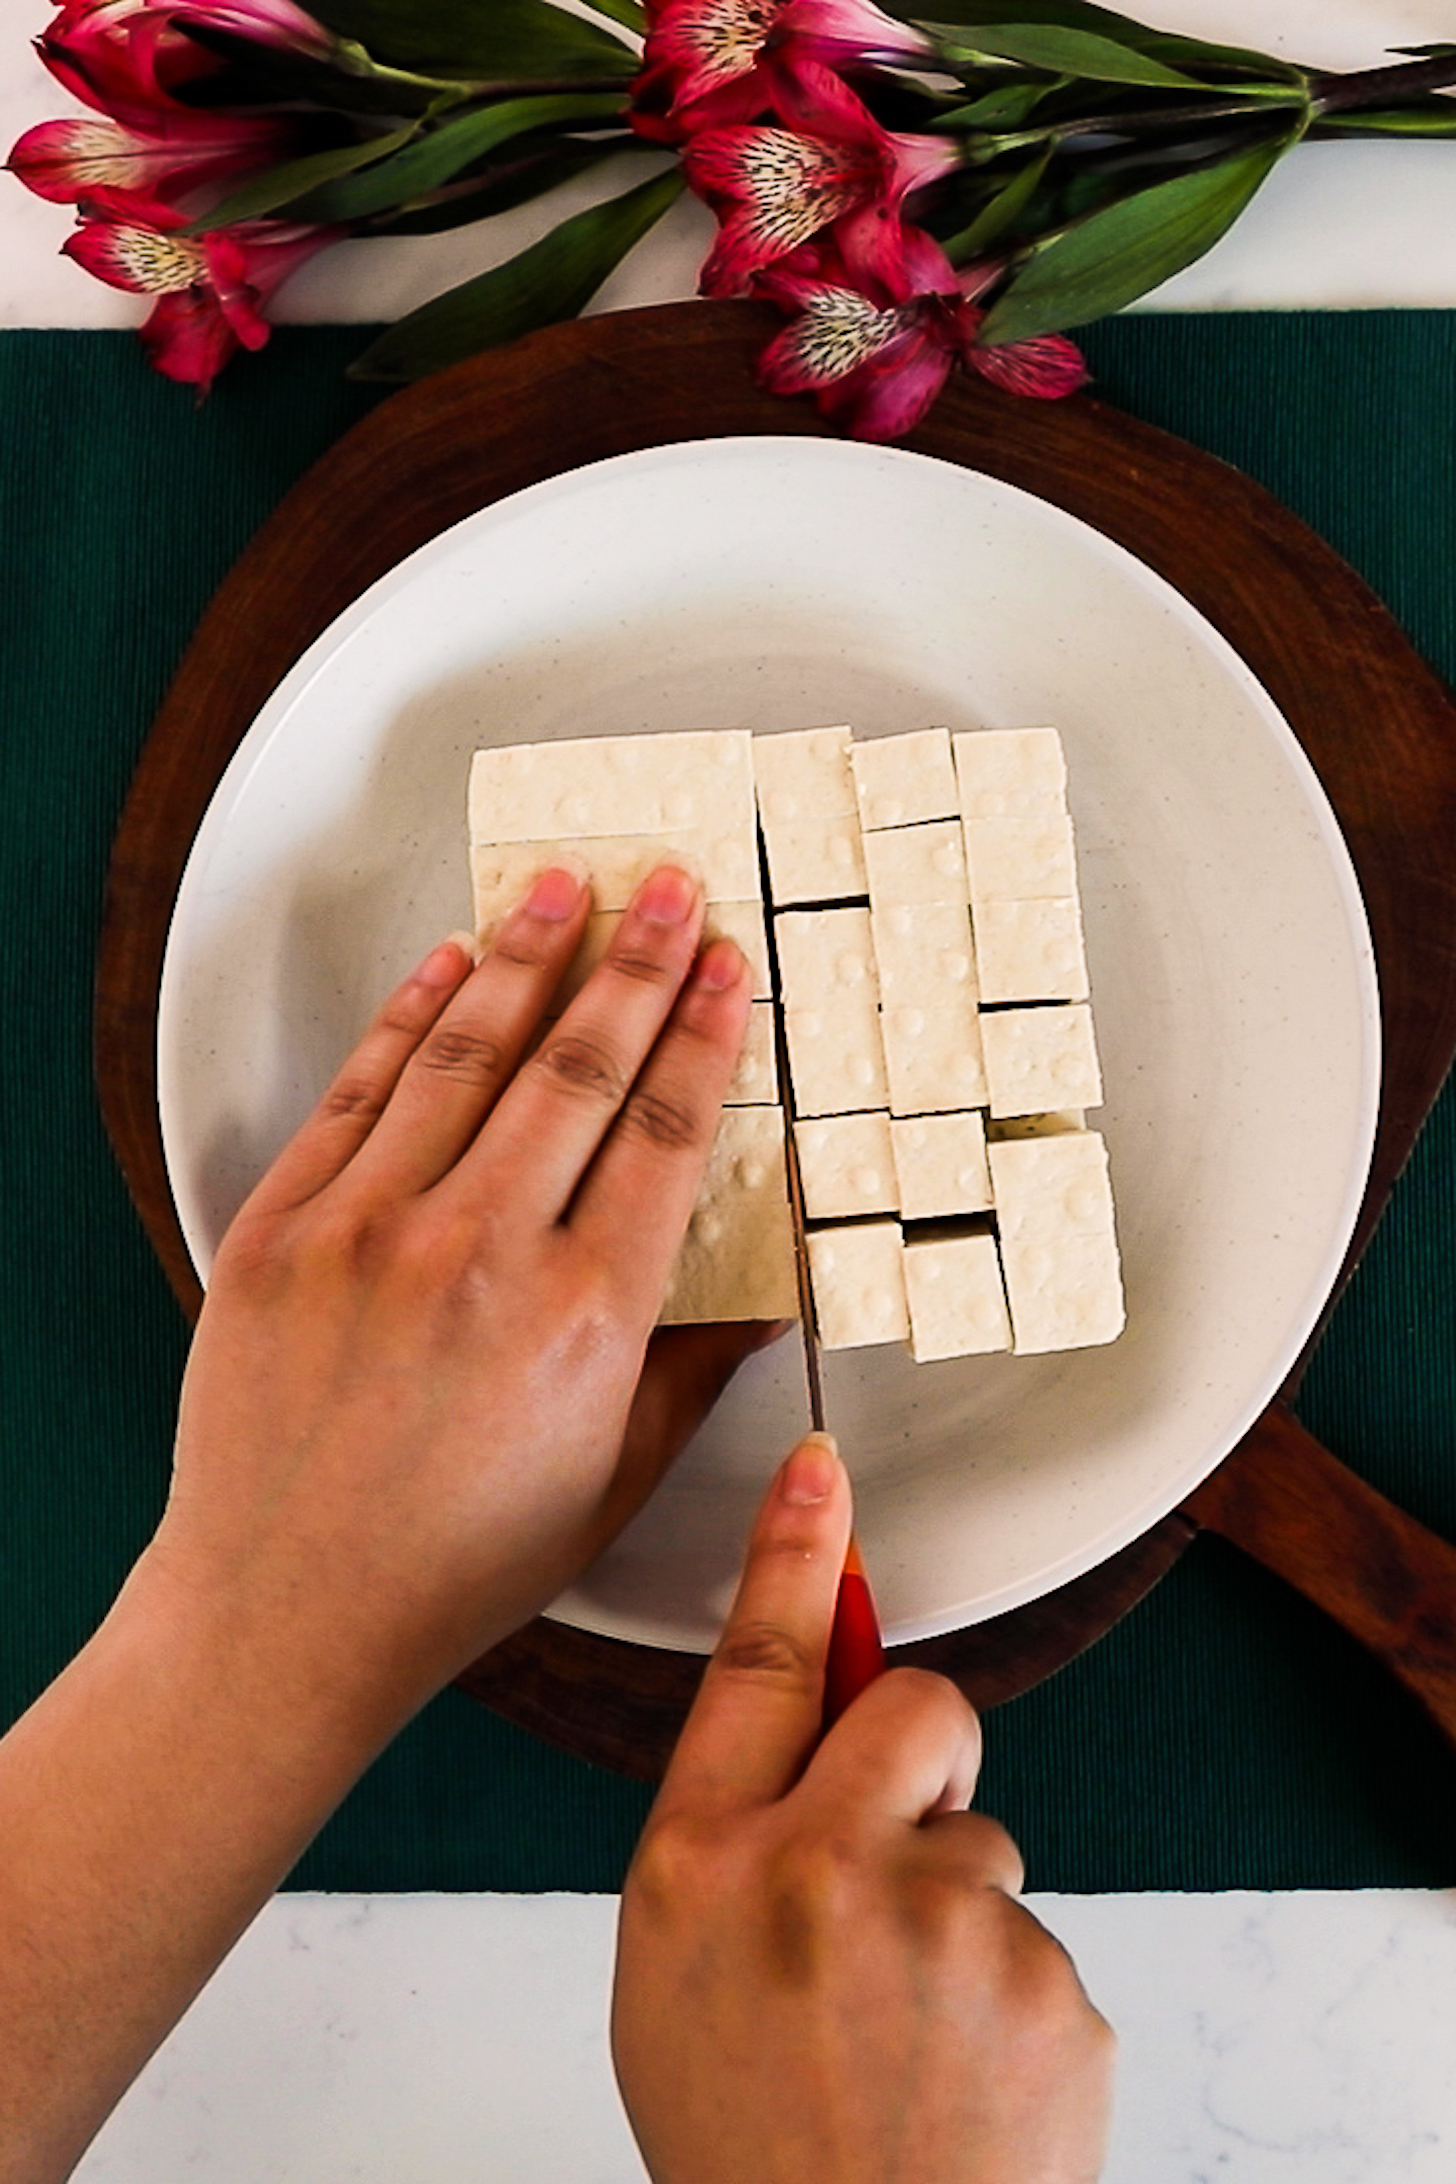 One hand holding a slab of tofu and the other cutting it into cubes using a knife.